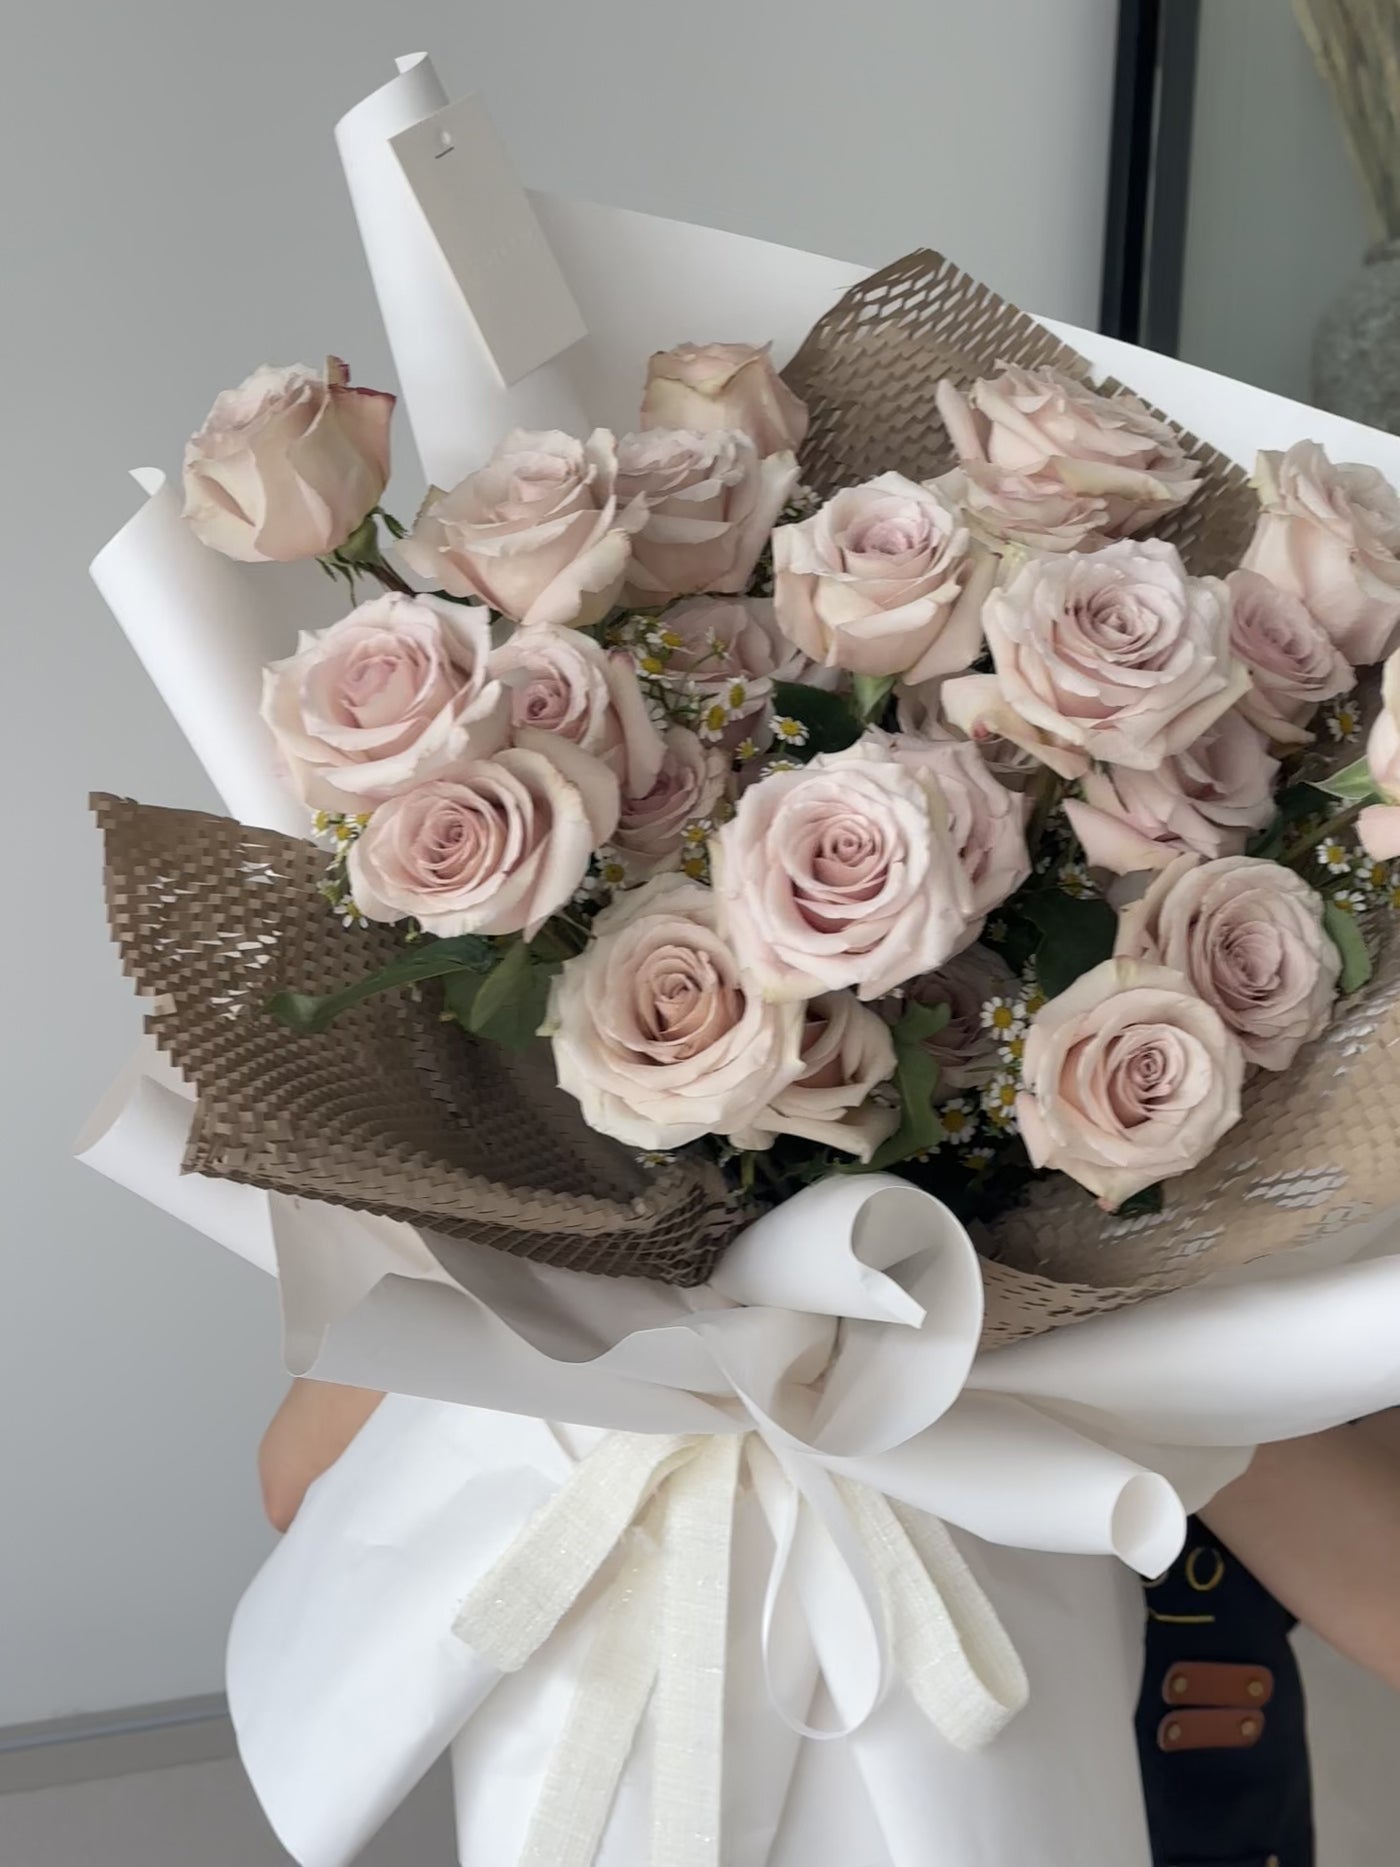 bouquet of rose, same day delivery flower, floristry, bridal bouquet